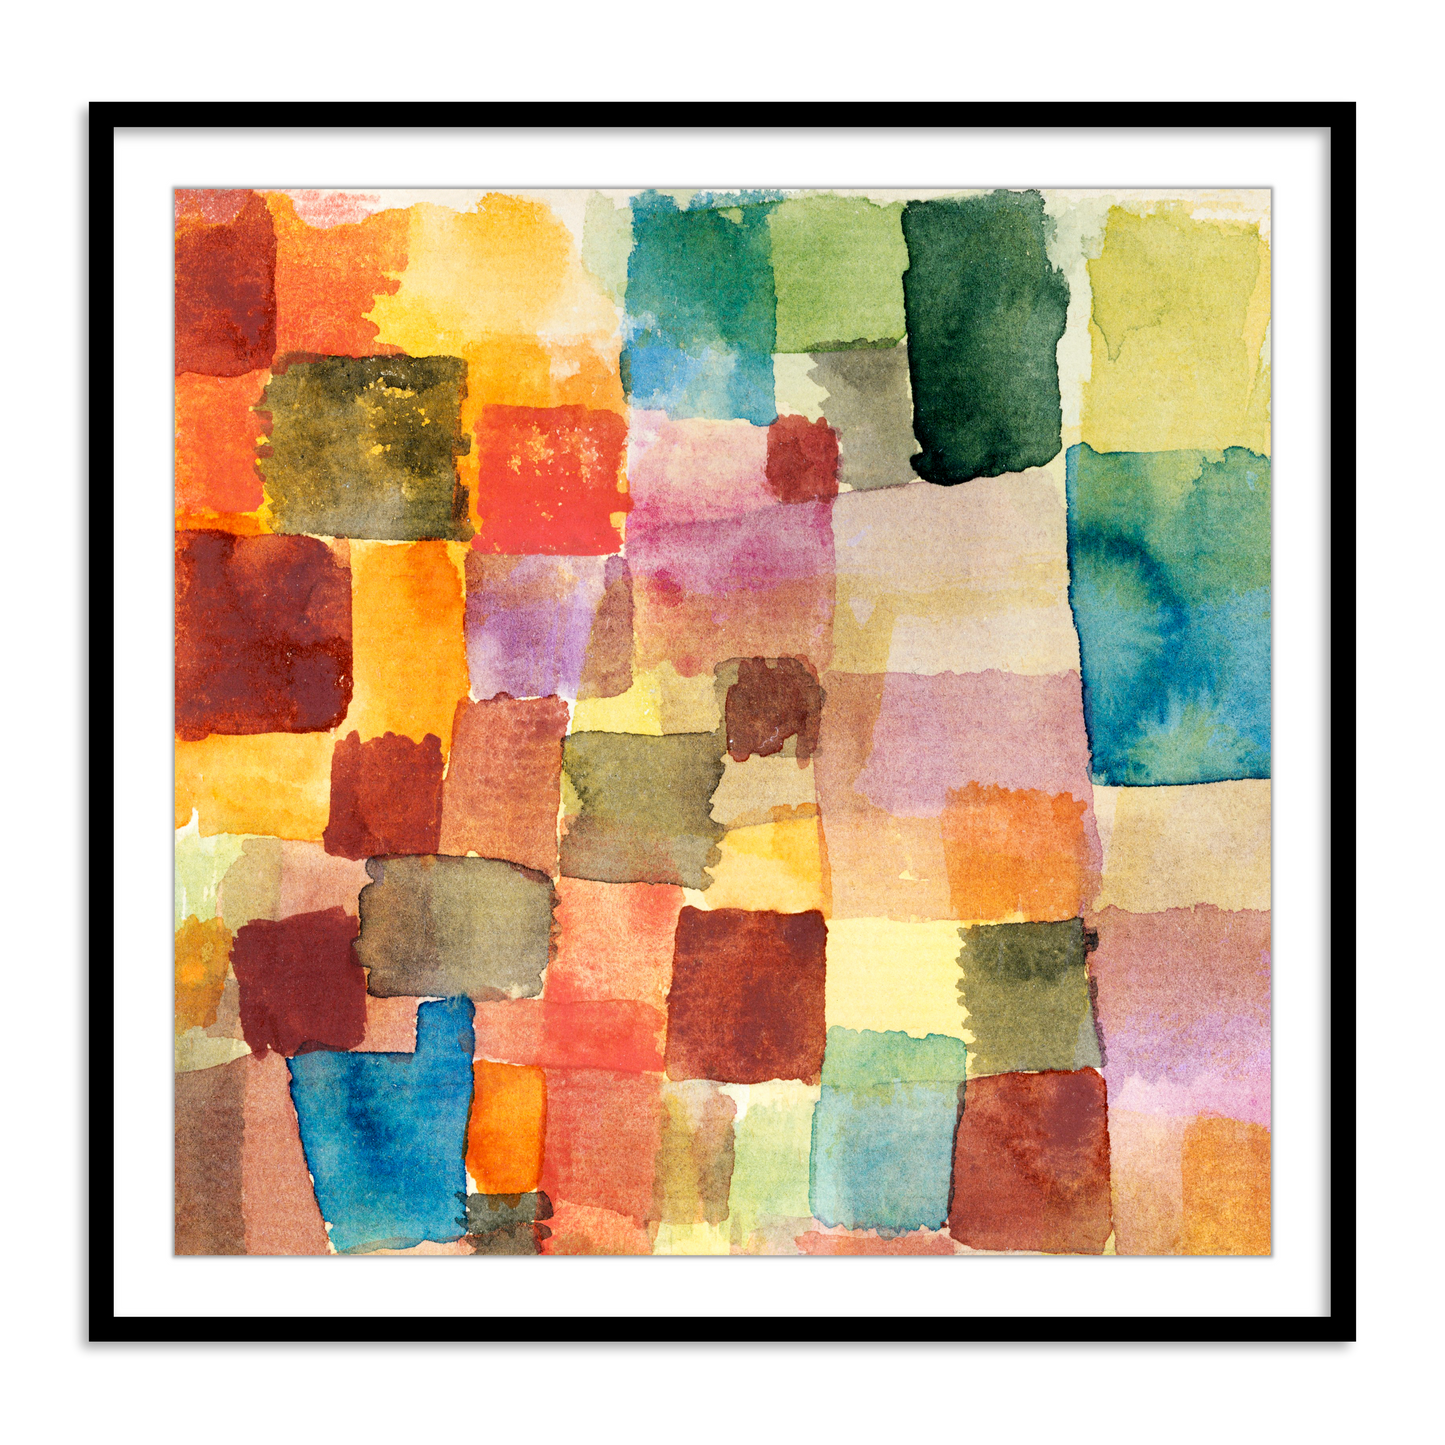 Untitled 2 by Paul Klee